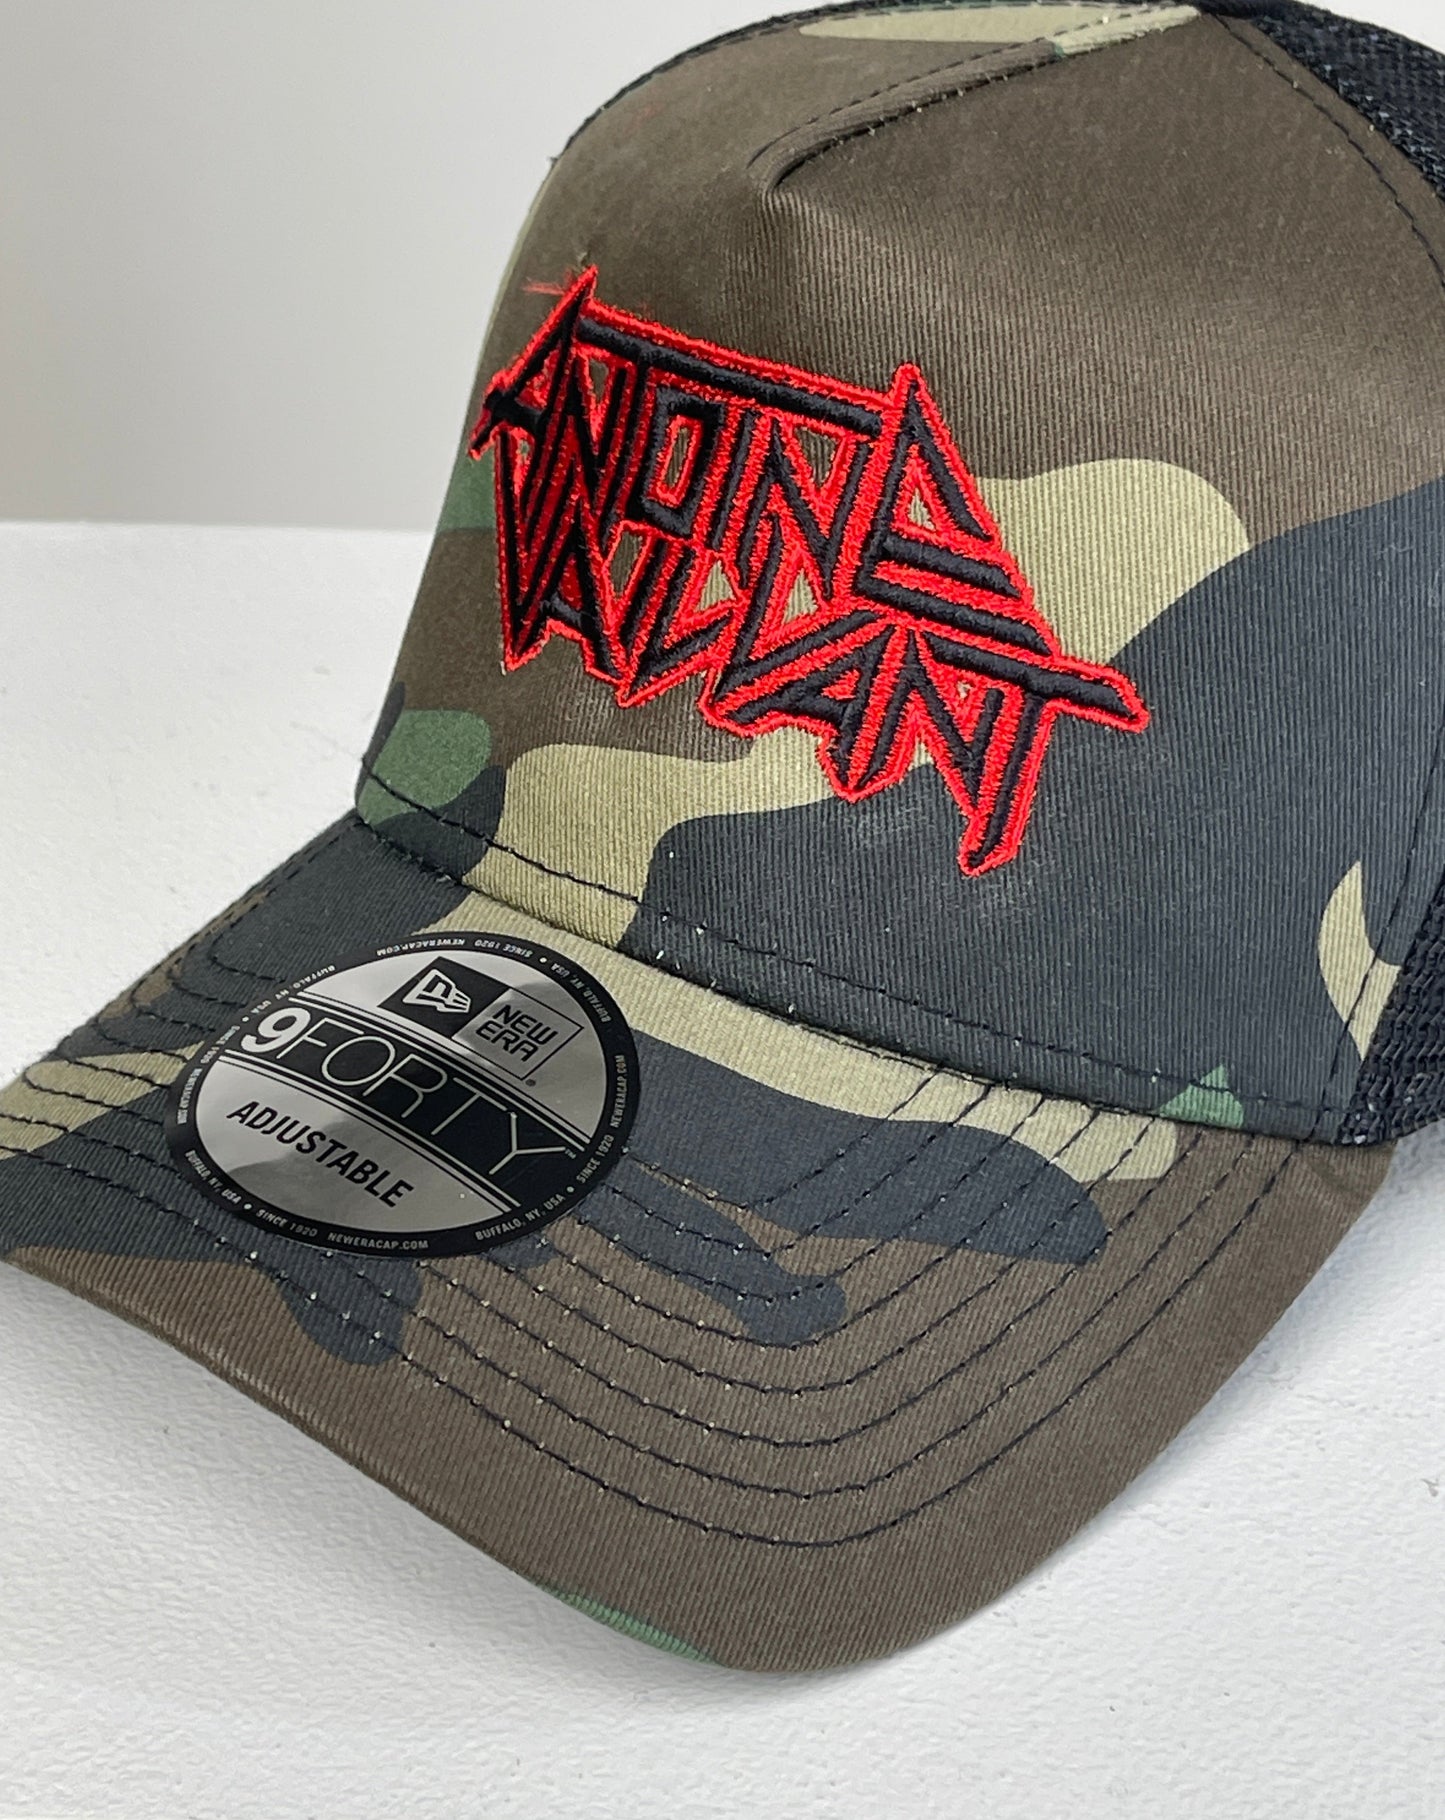 The Keep On Trucking Hat